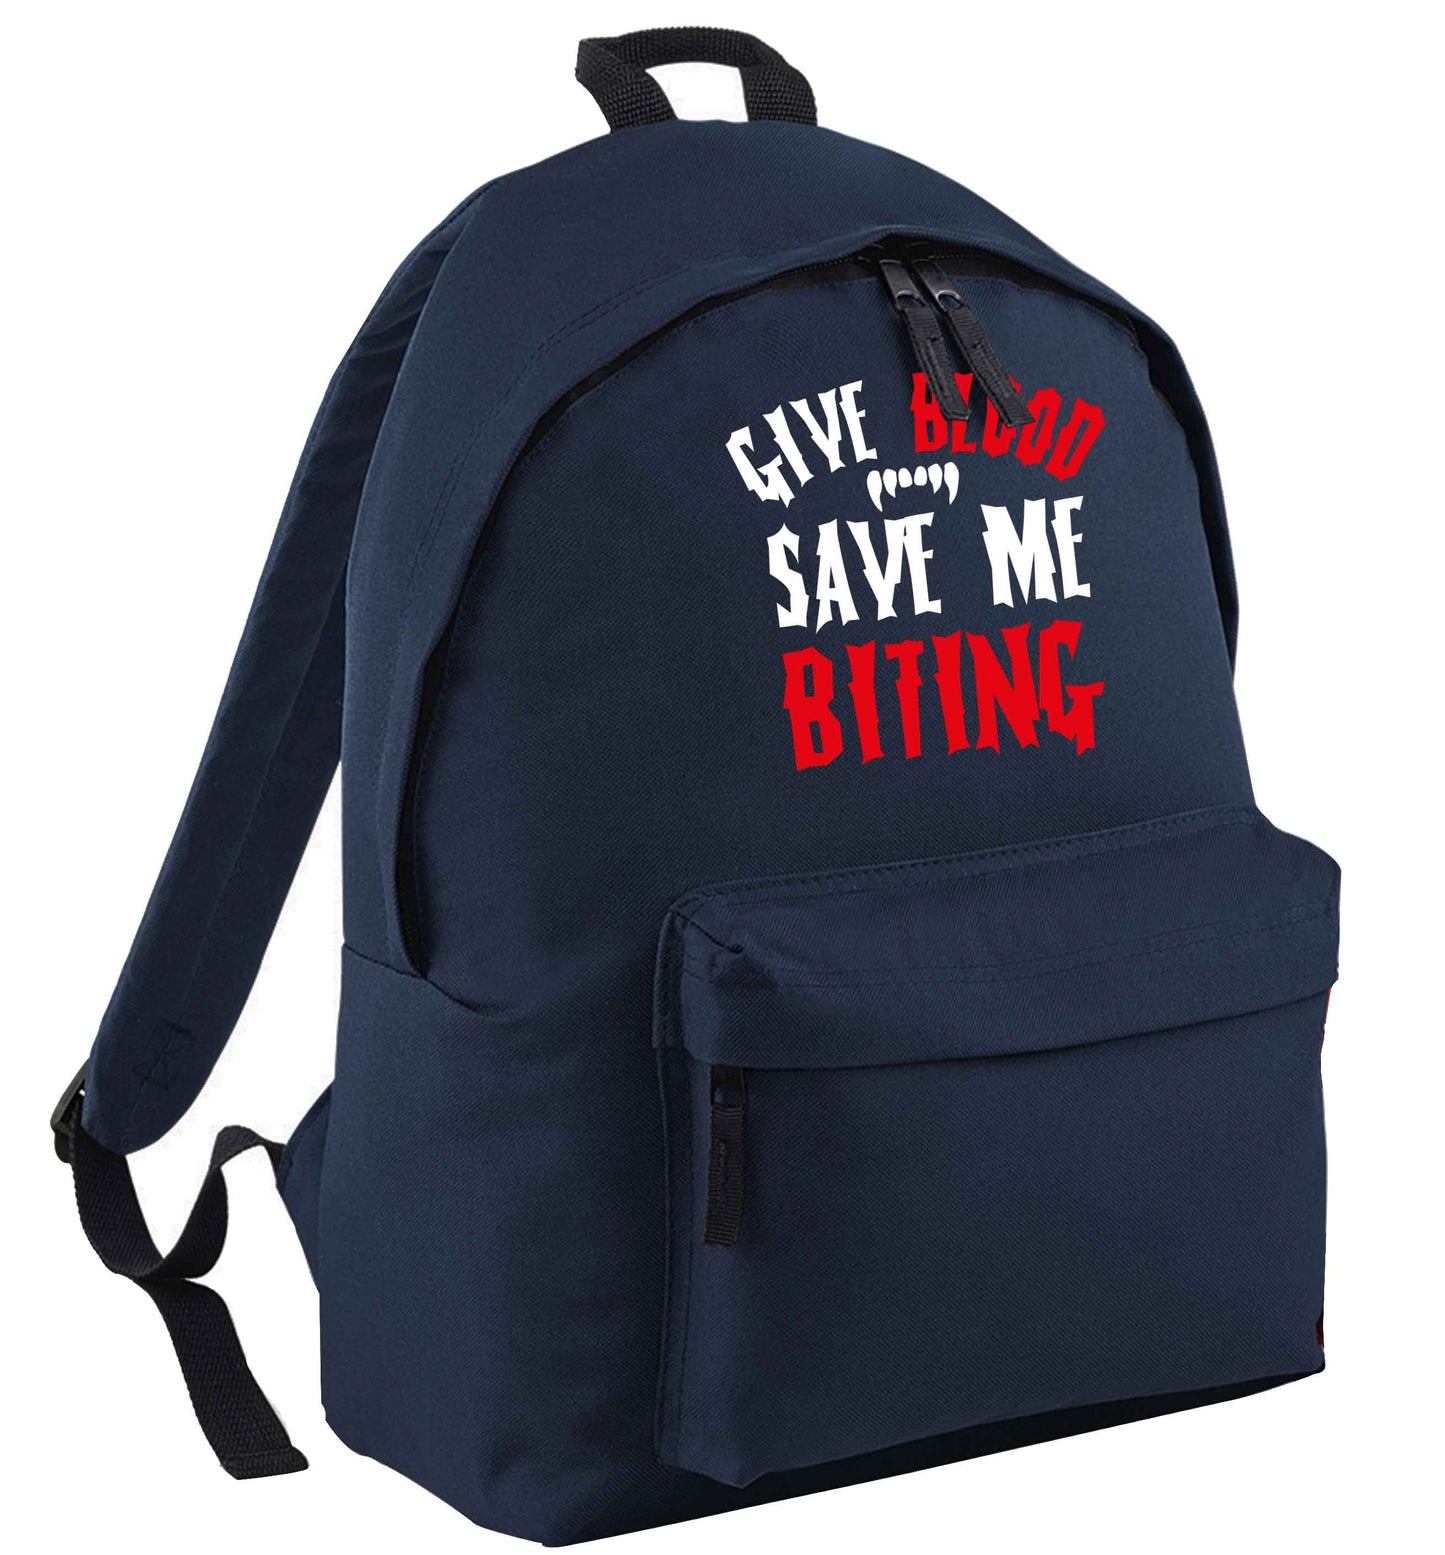 Give blood save me biting navy adults backpack